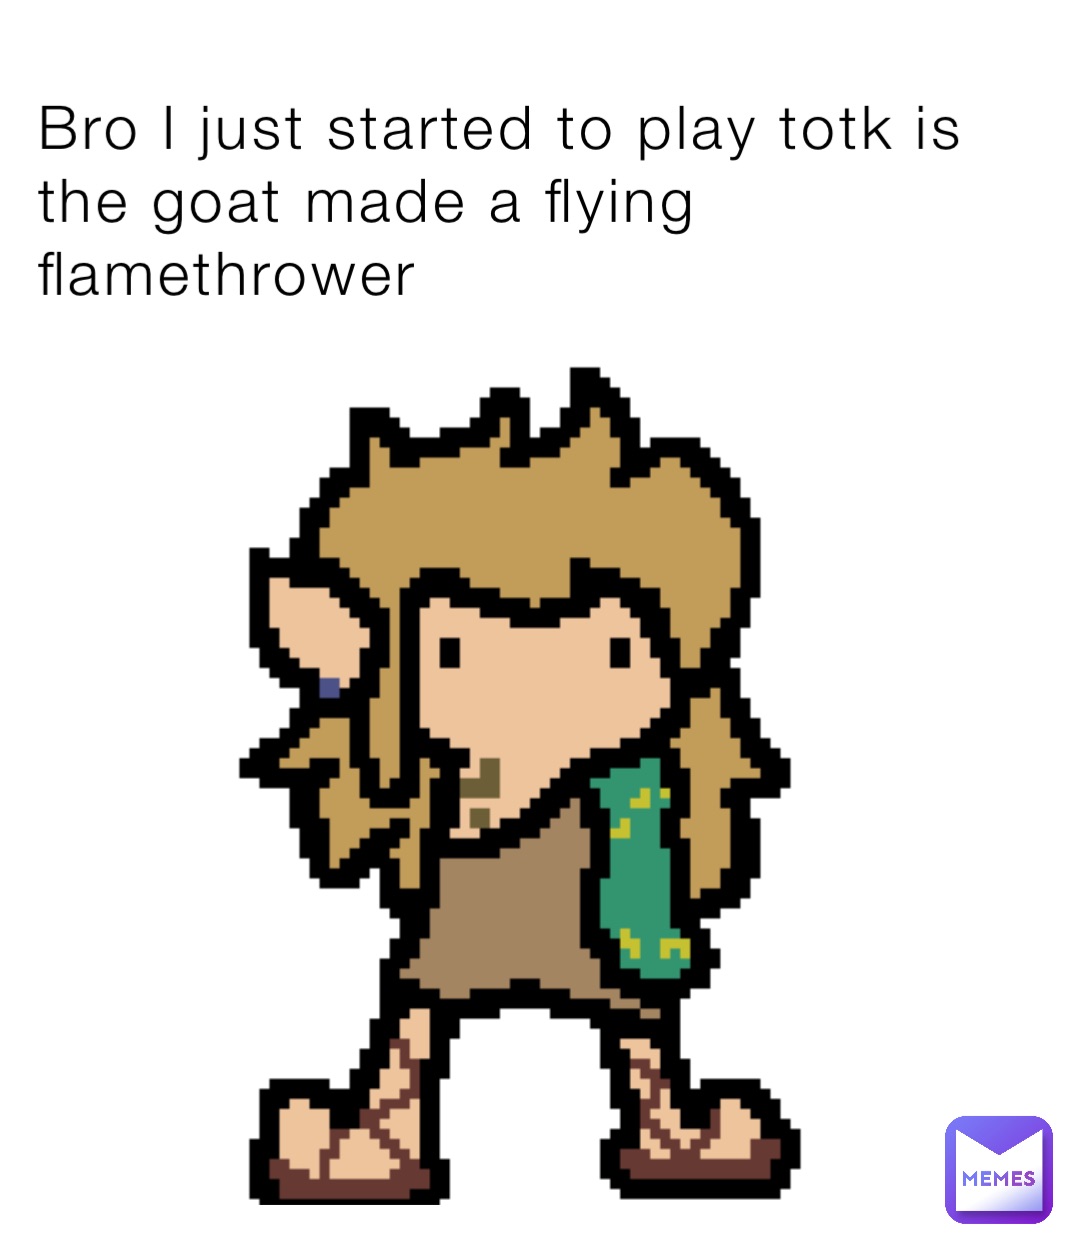 Bro I just started to play totk is the goat made a flying flamethrower